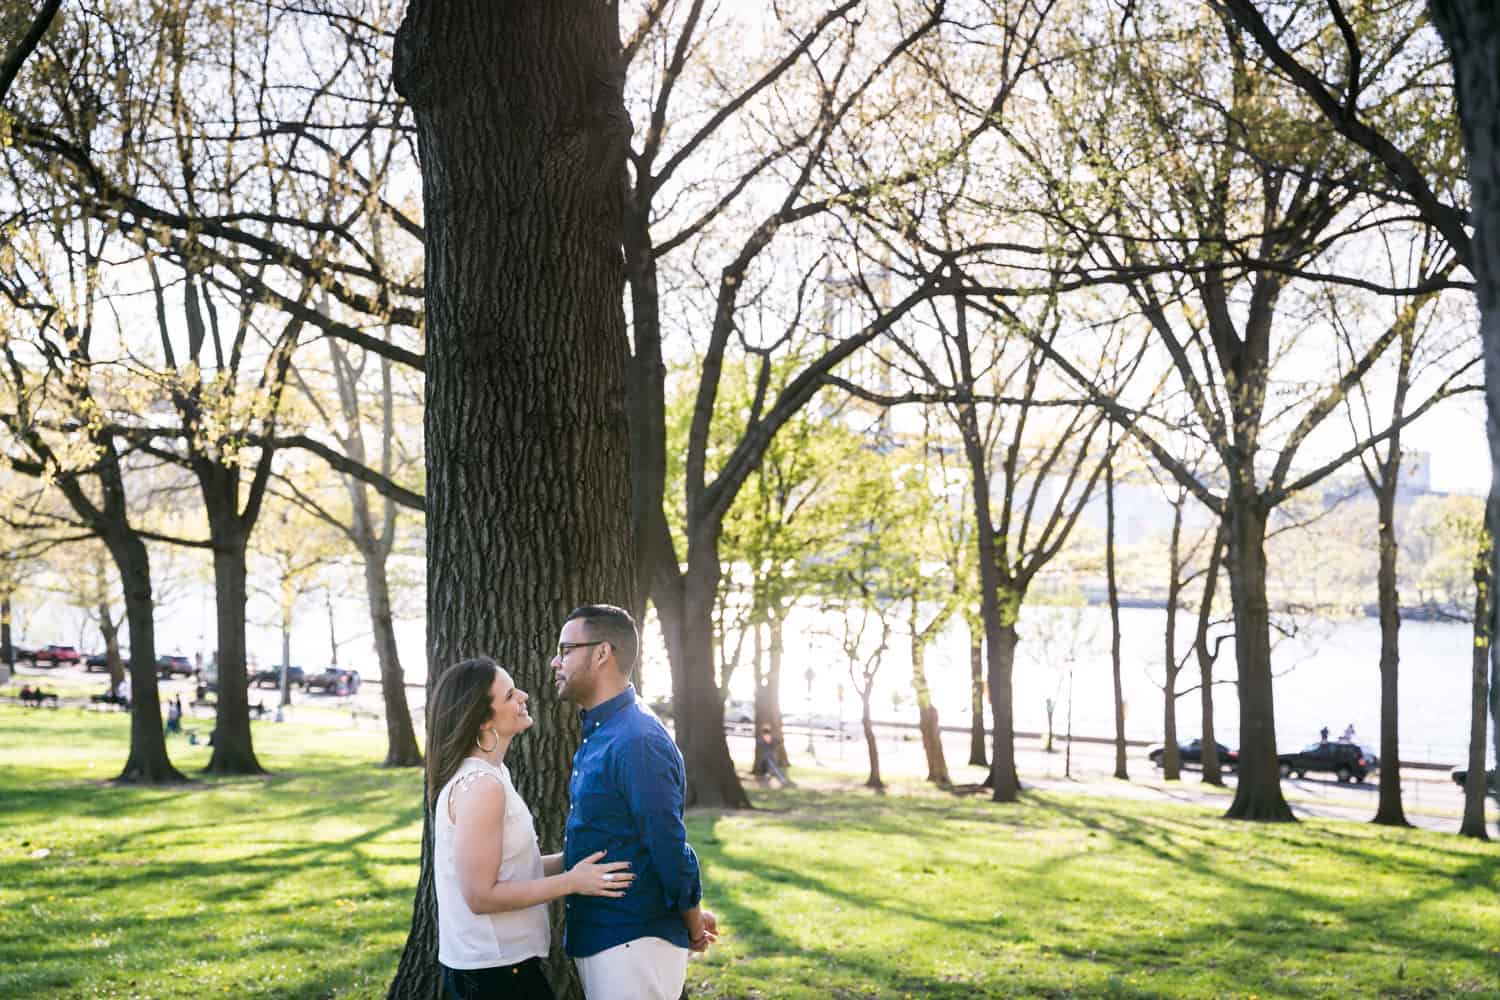 Couple hugging in front of tree during an Astoria Park engagement shoot